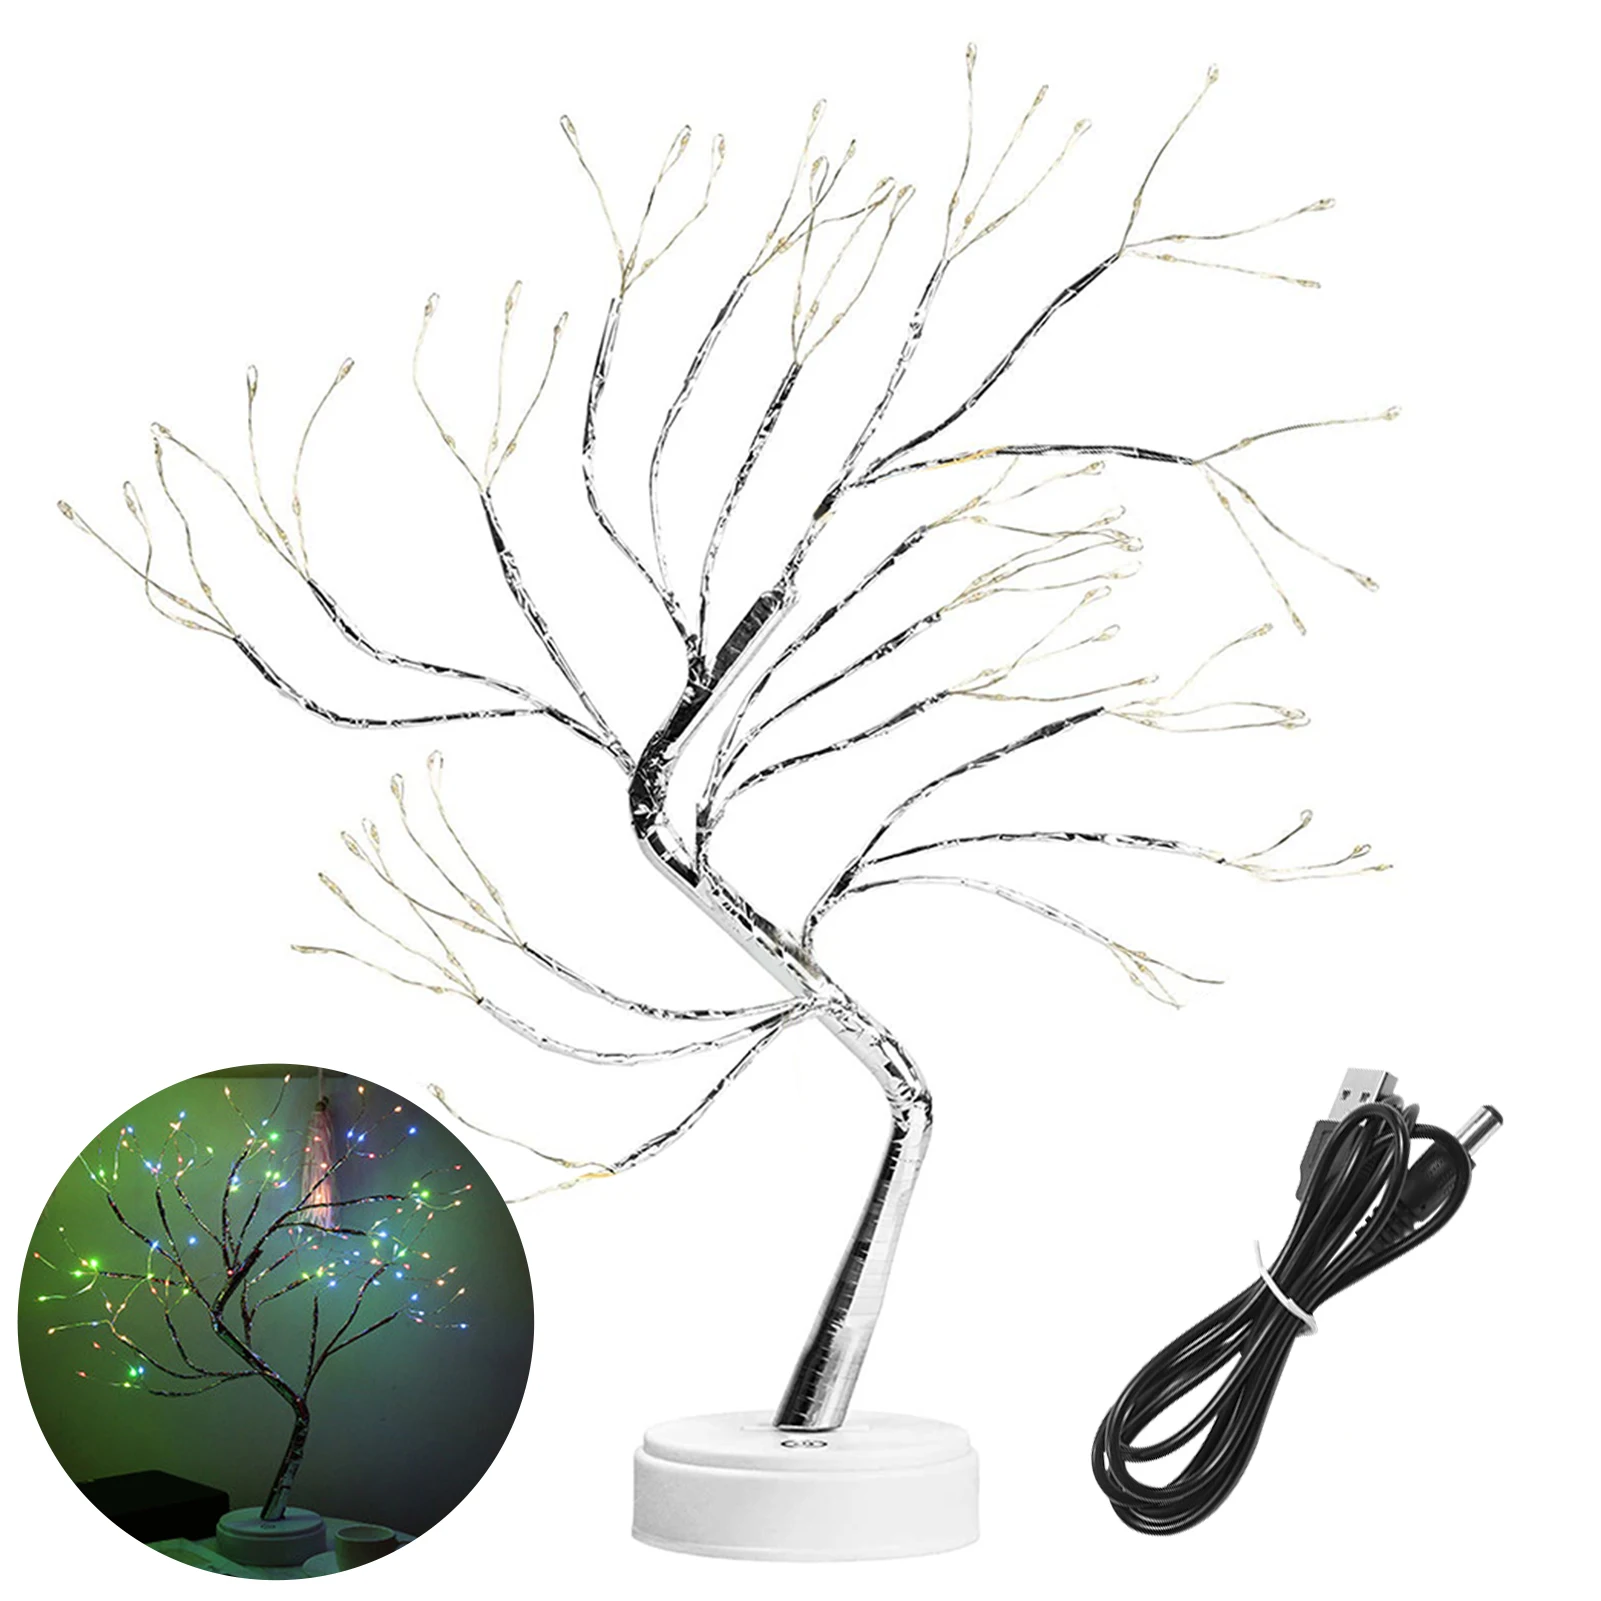 

20inch Mini Party 108 LED Bedroom Women Girls Home Indoor Decor Battery USB Operated Tree Light Christmas DIY Sparkly Festival